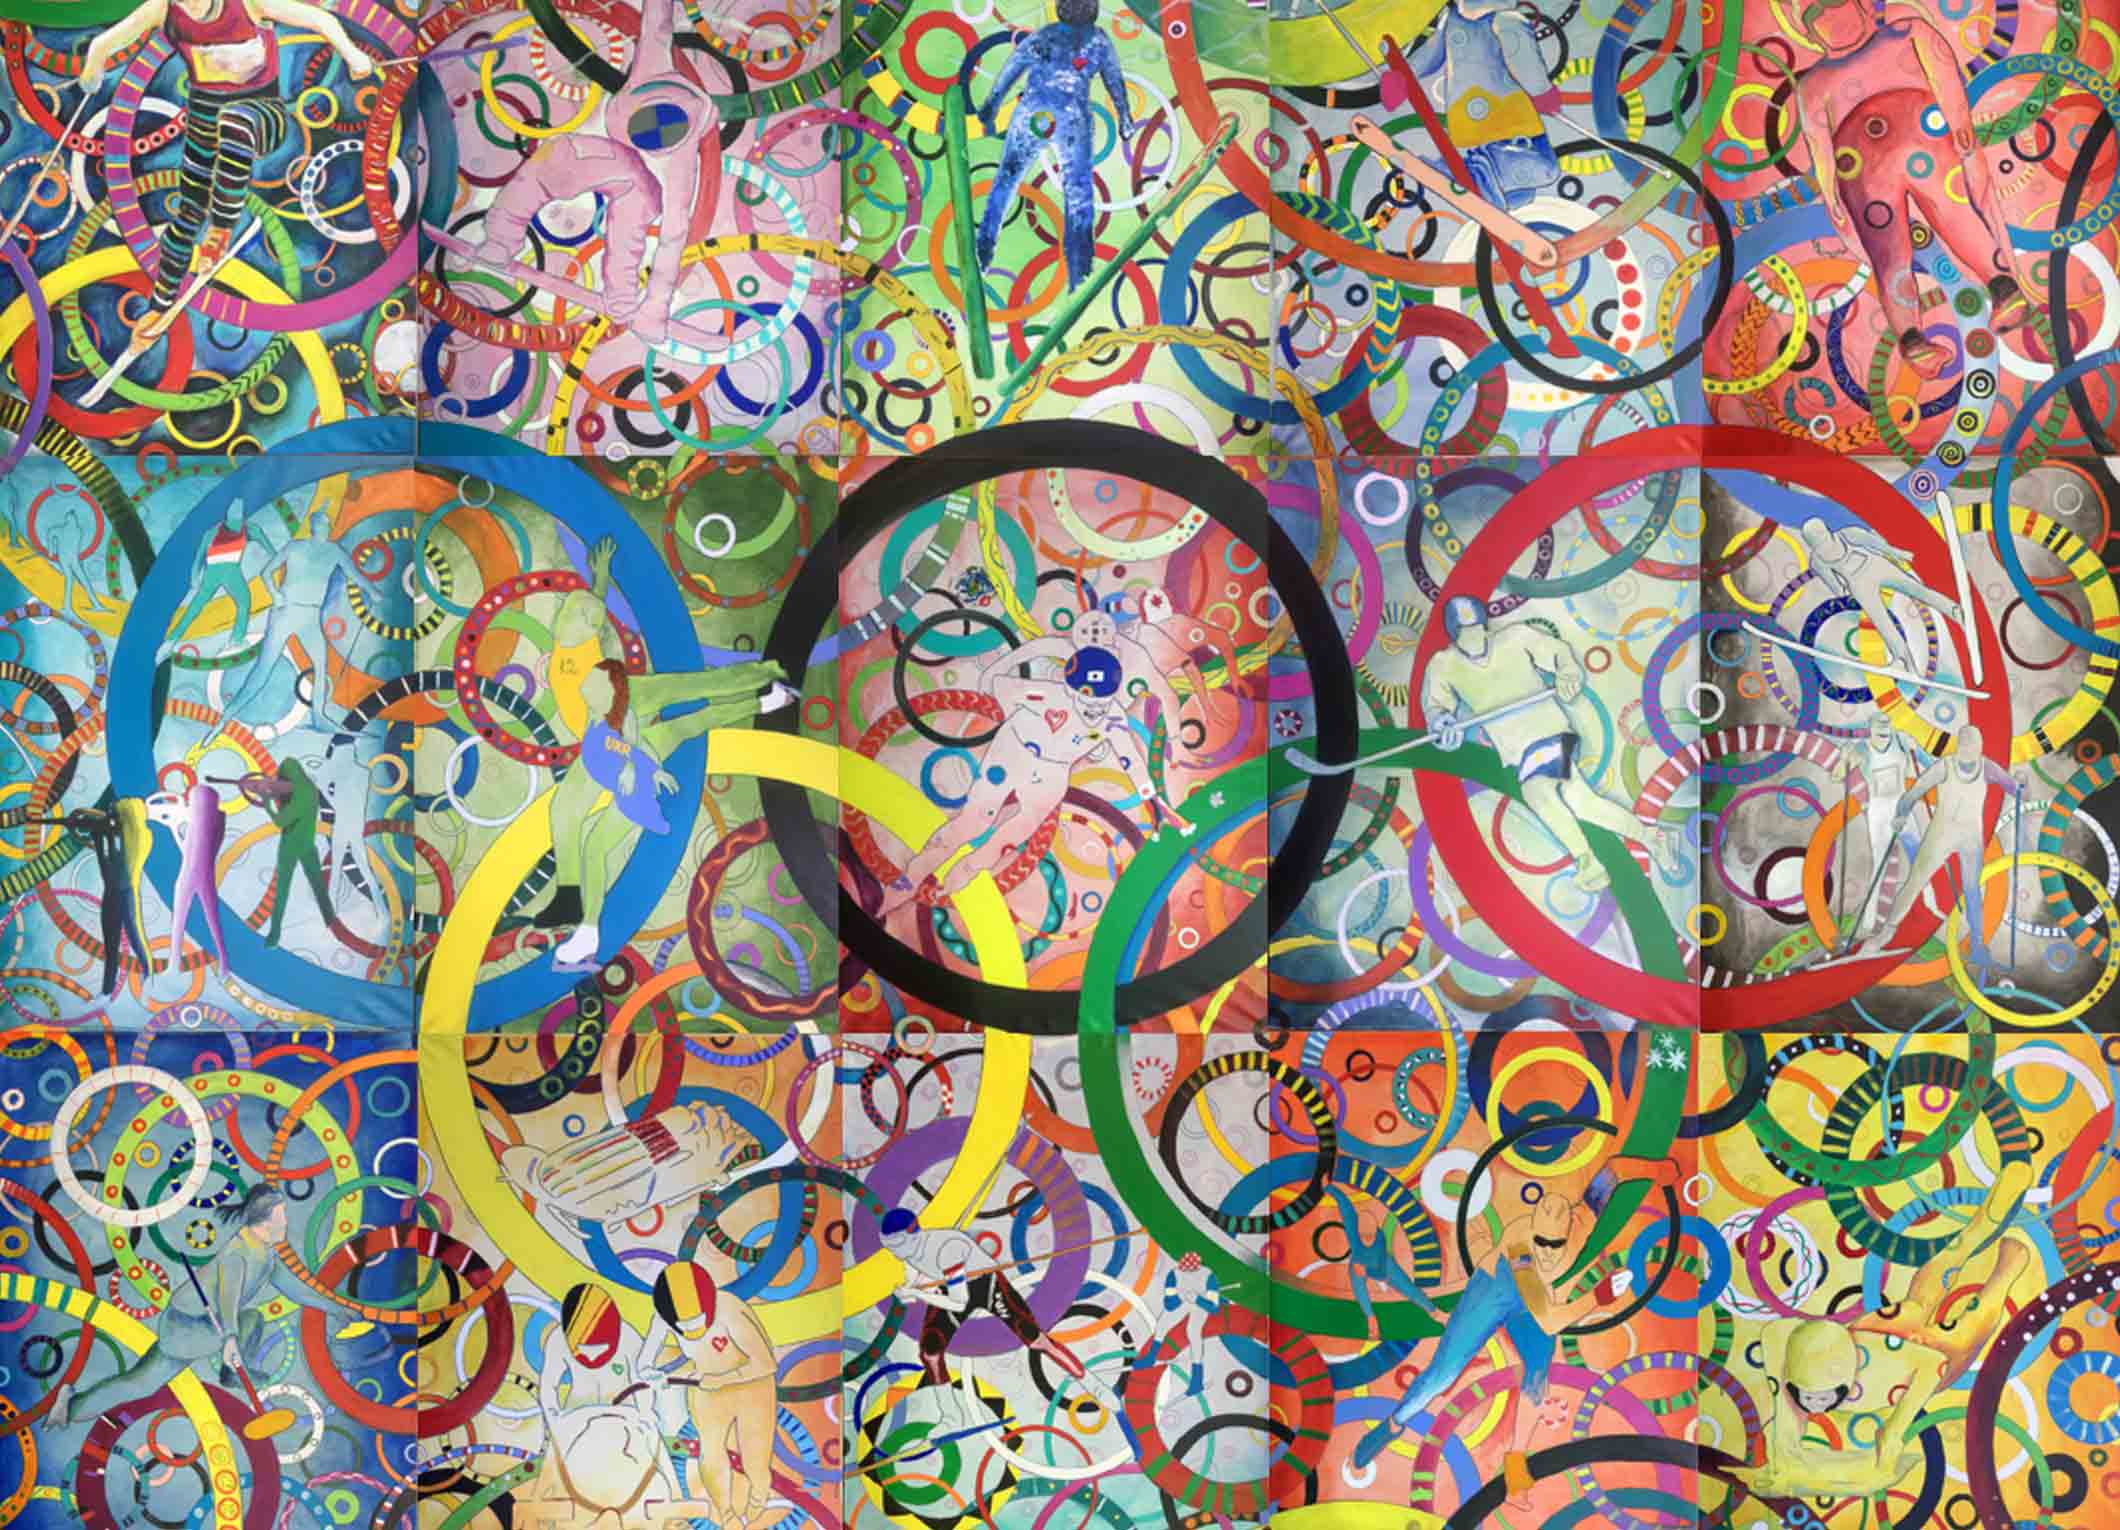 Olympic Art Visions